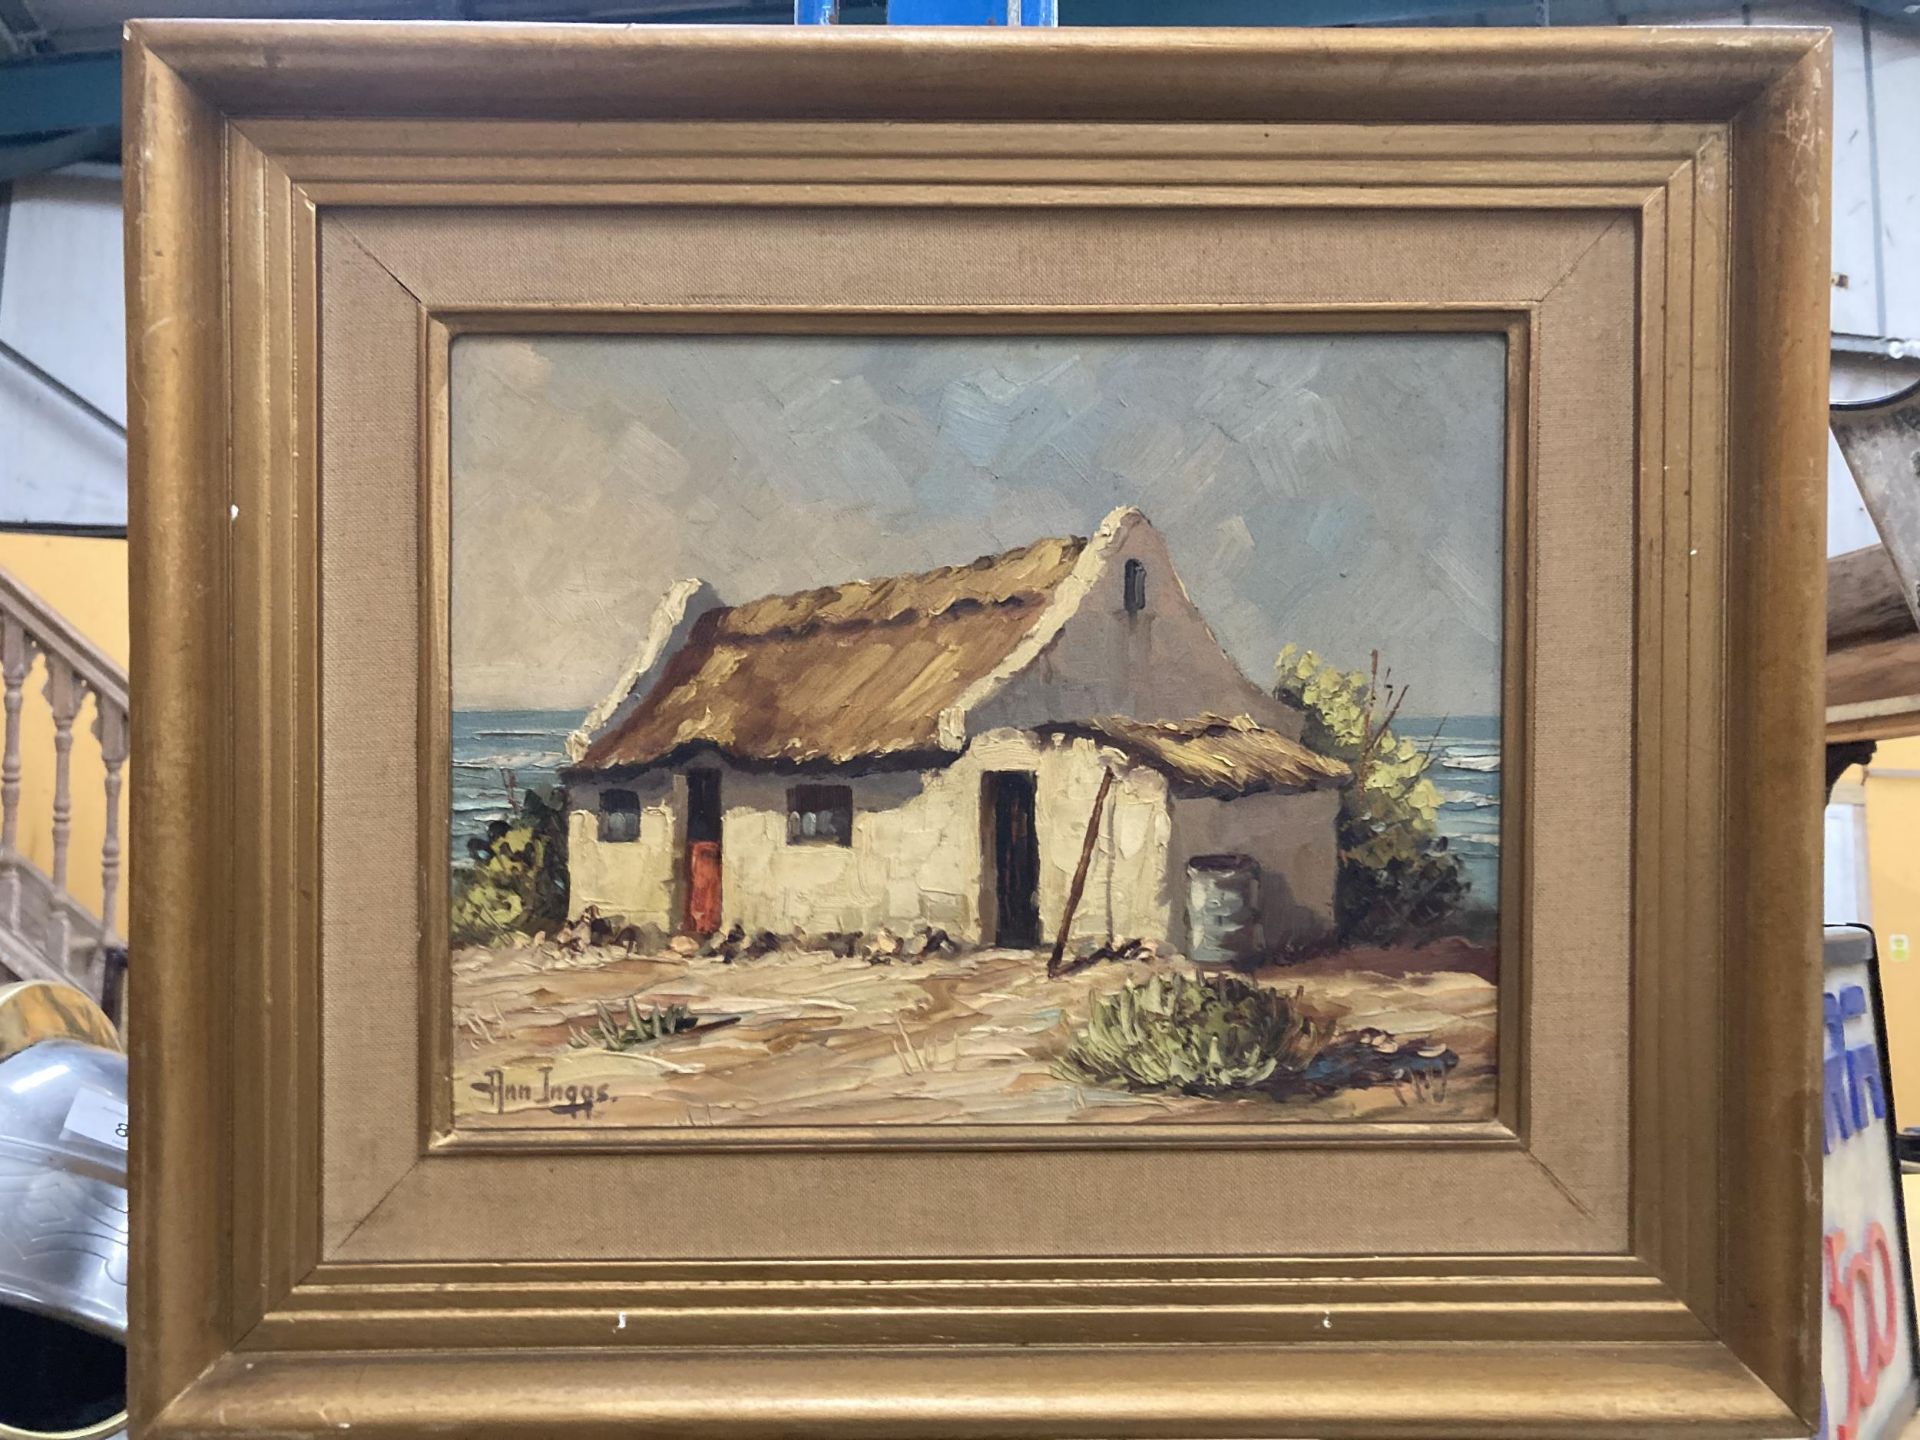 AN ANN INGGS 1936 SOUTH AFRICA FRAMED OIL PAINTING OF A HOUSE BY THE SEA